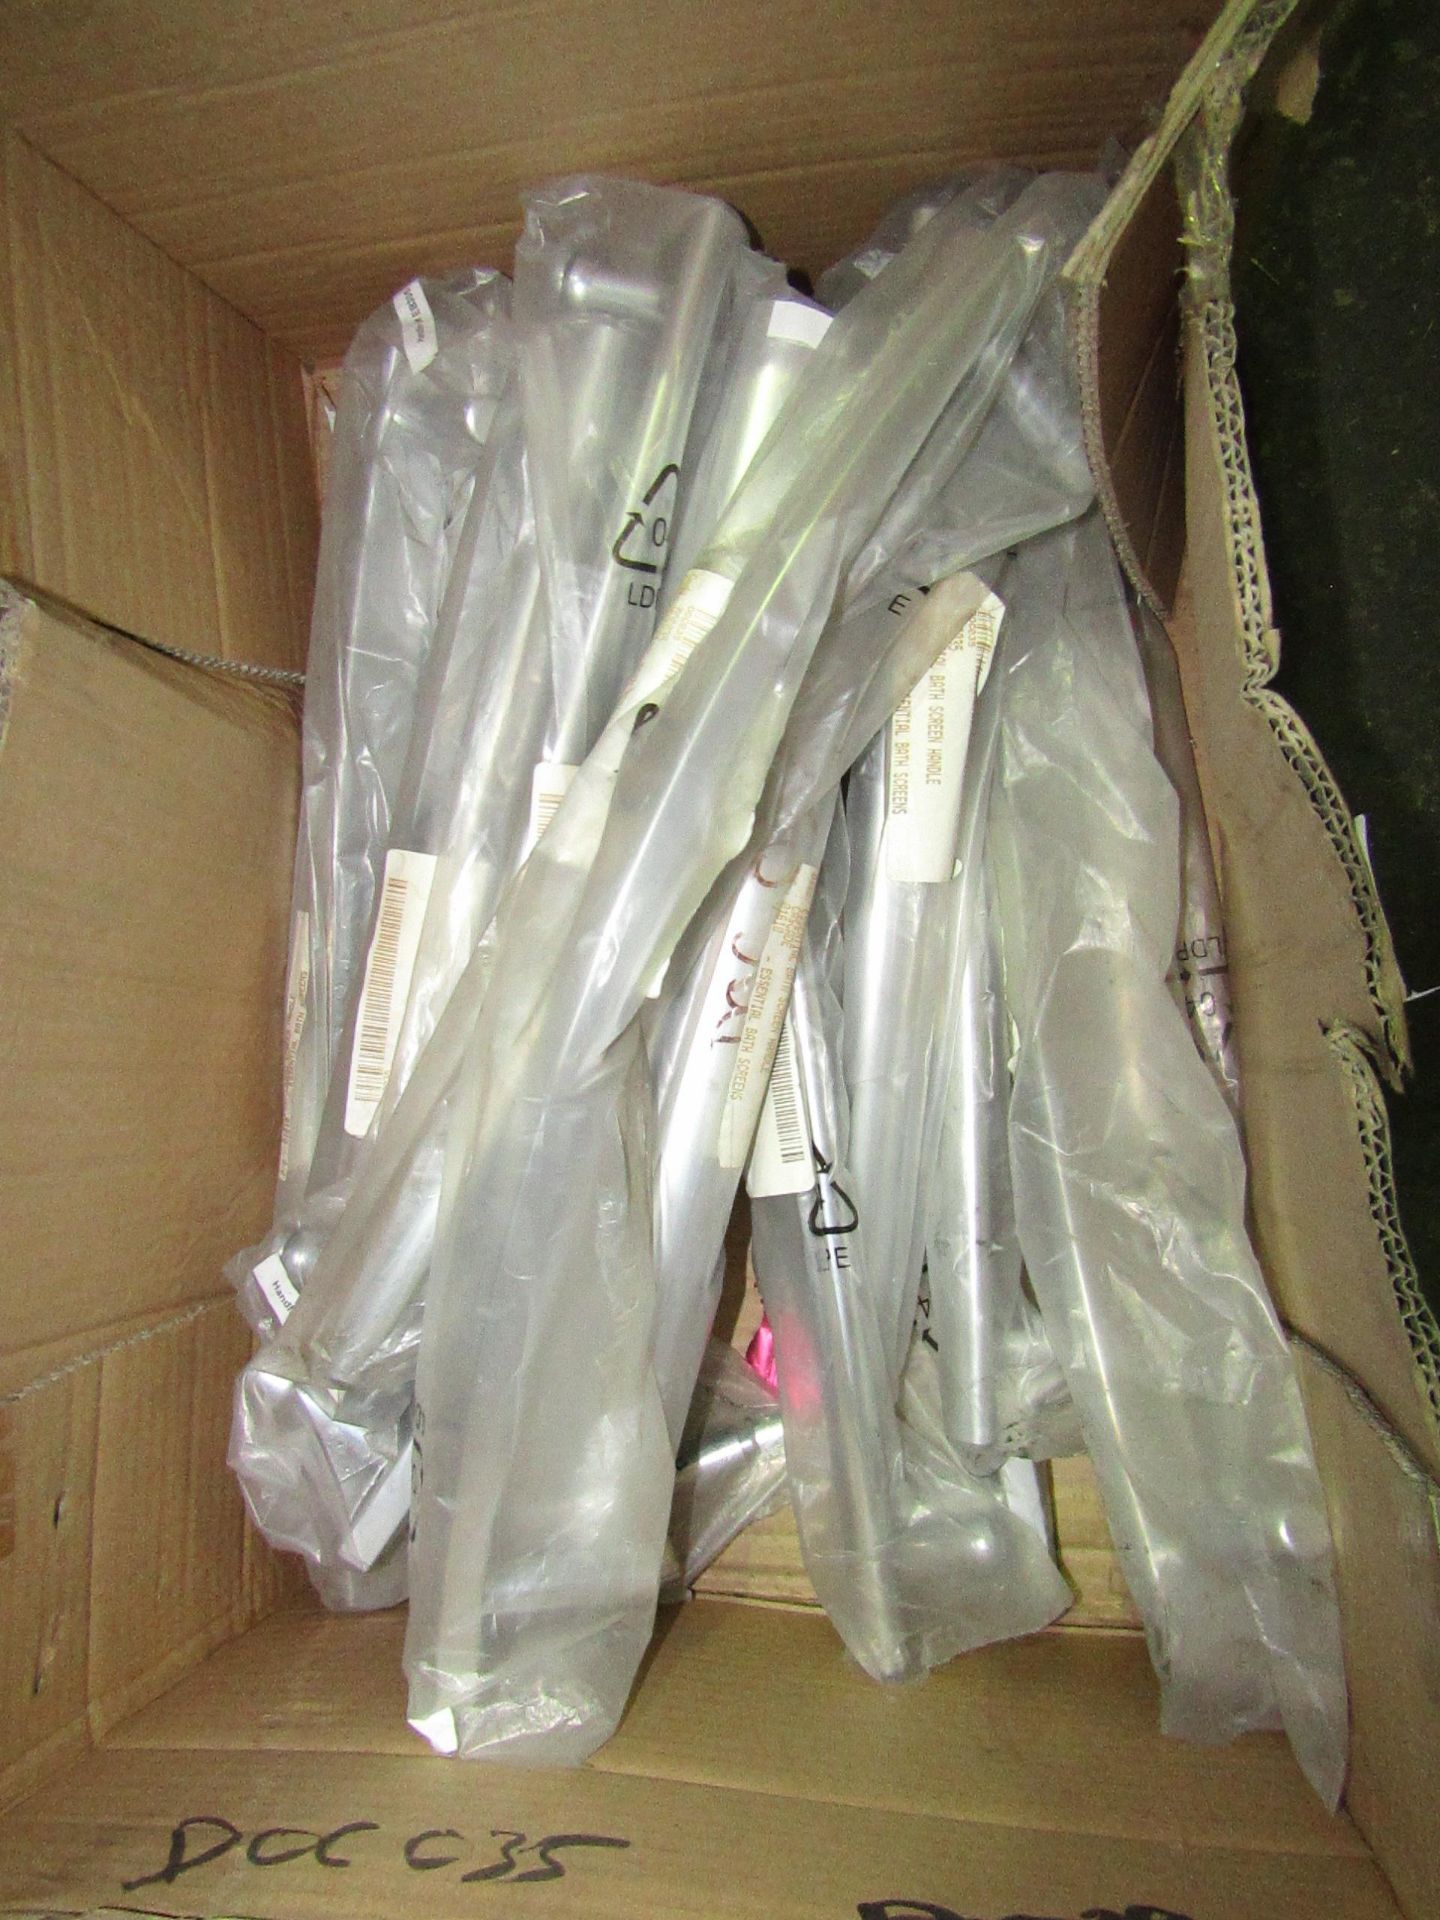 1x Box Containing Approx 12x Assorted Bath Screen Handles - All Unused.